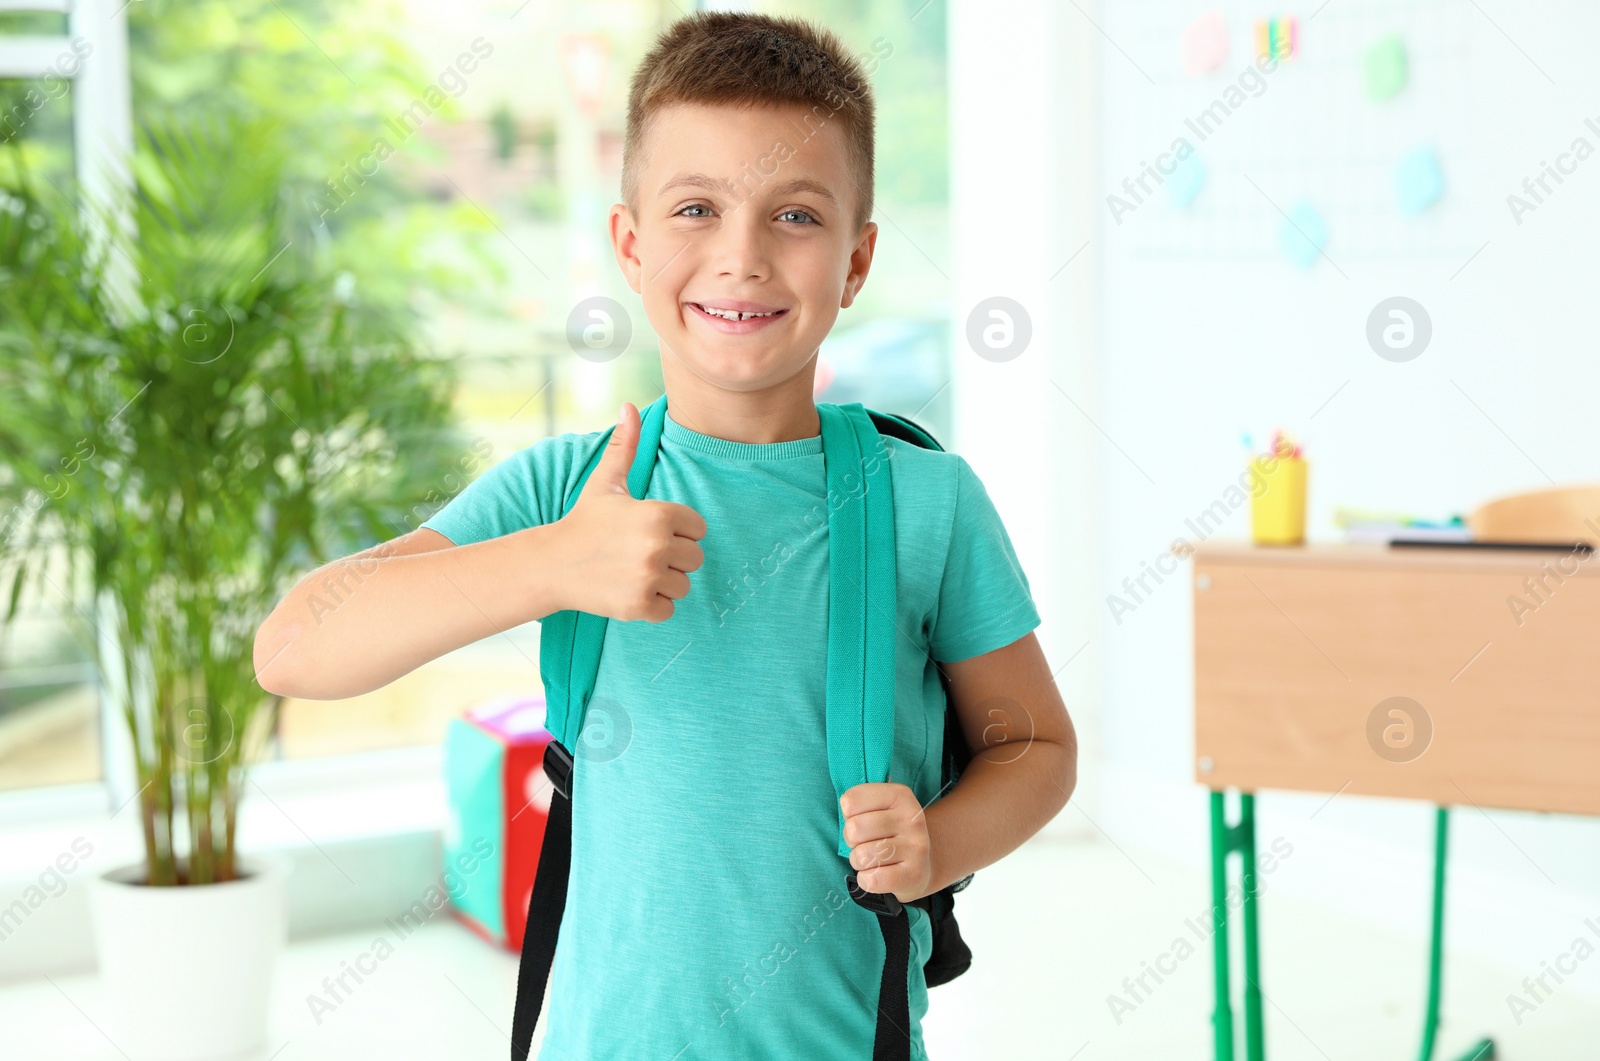 Photo of Cute little boy with backpack showing thumbs-up in classroom at school